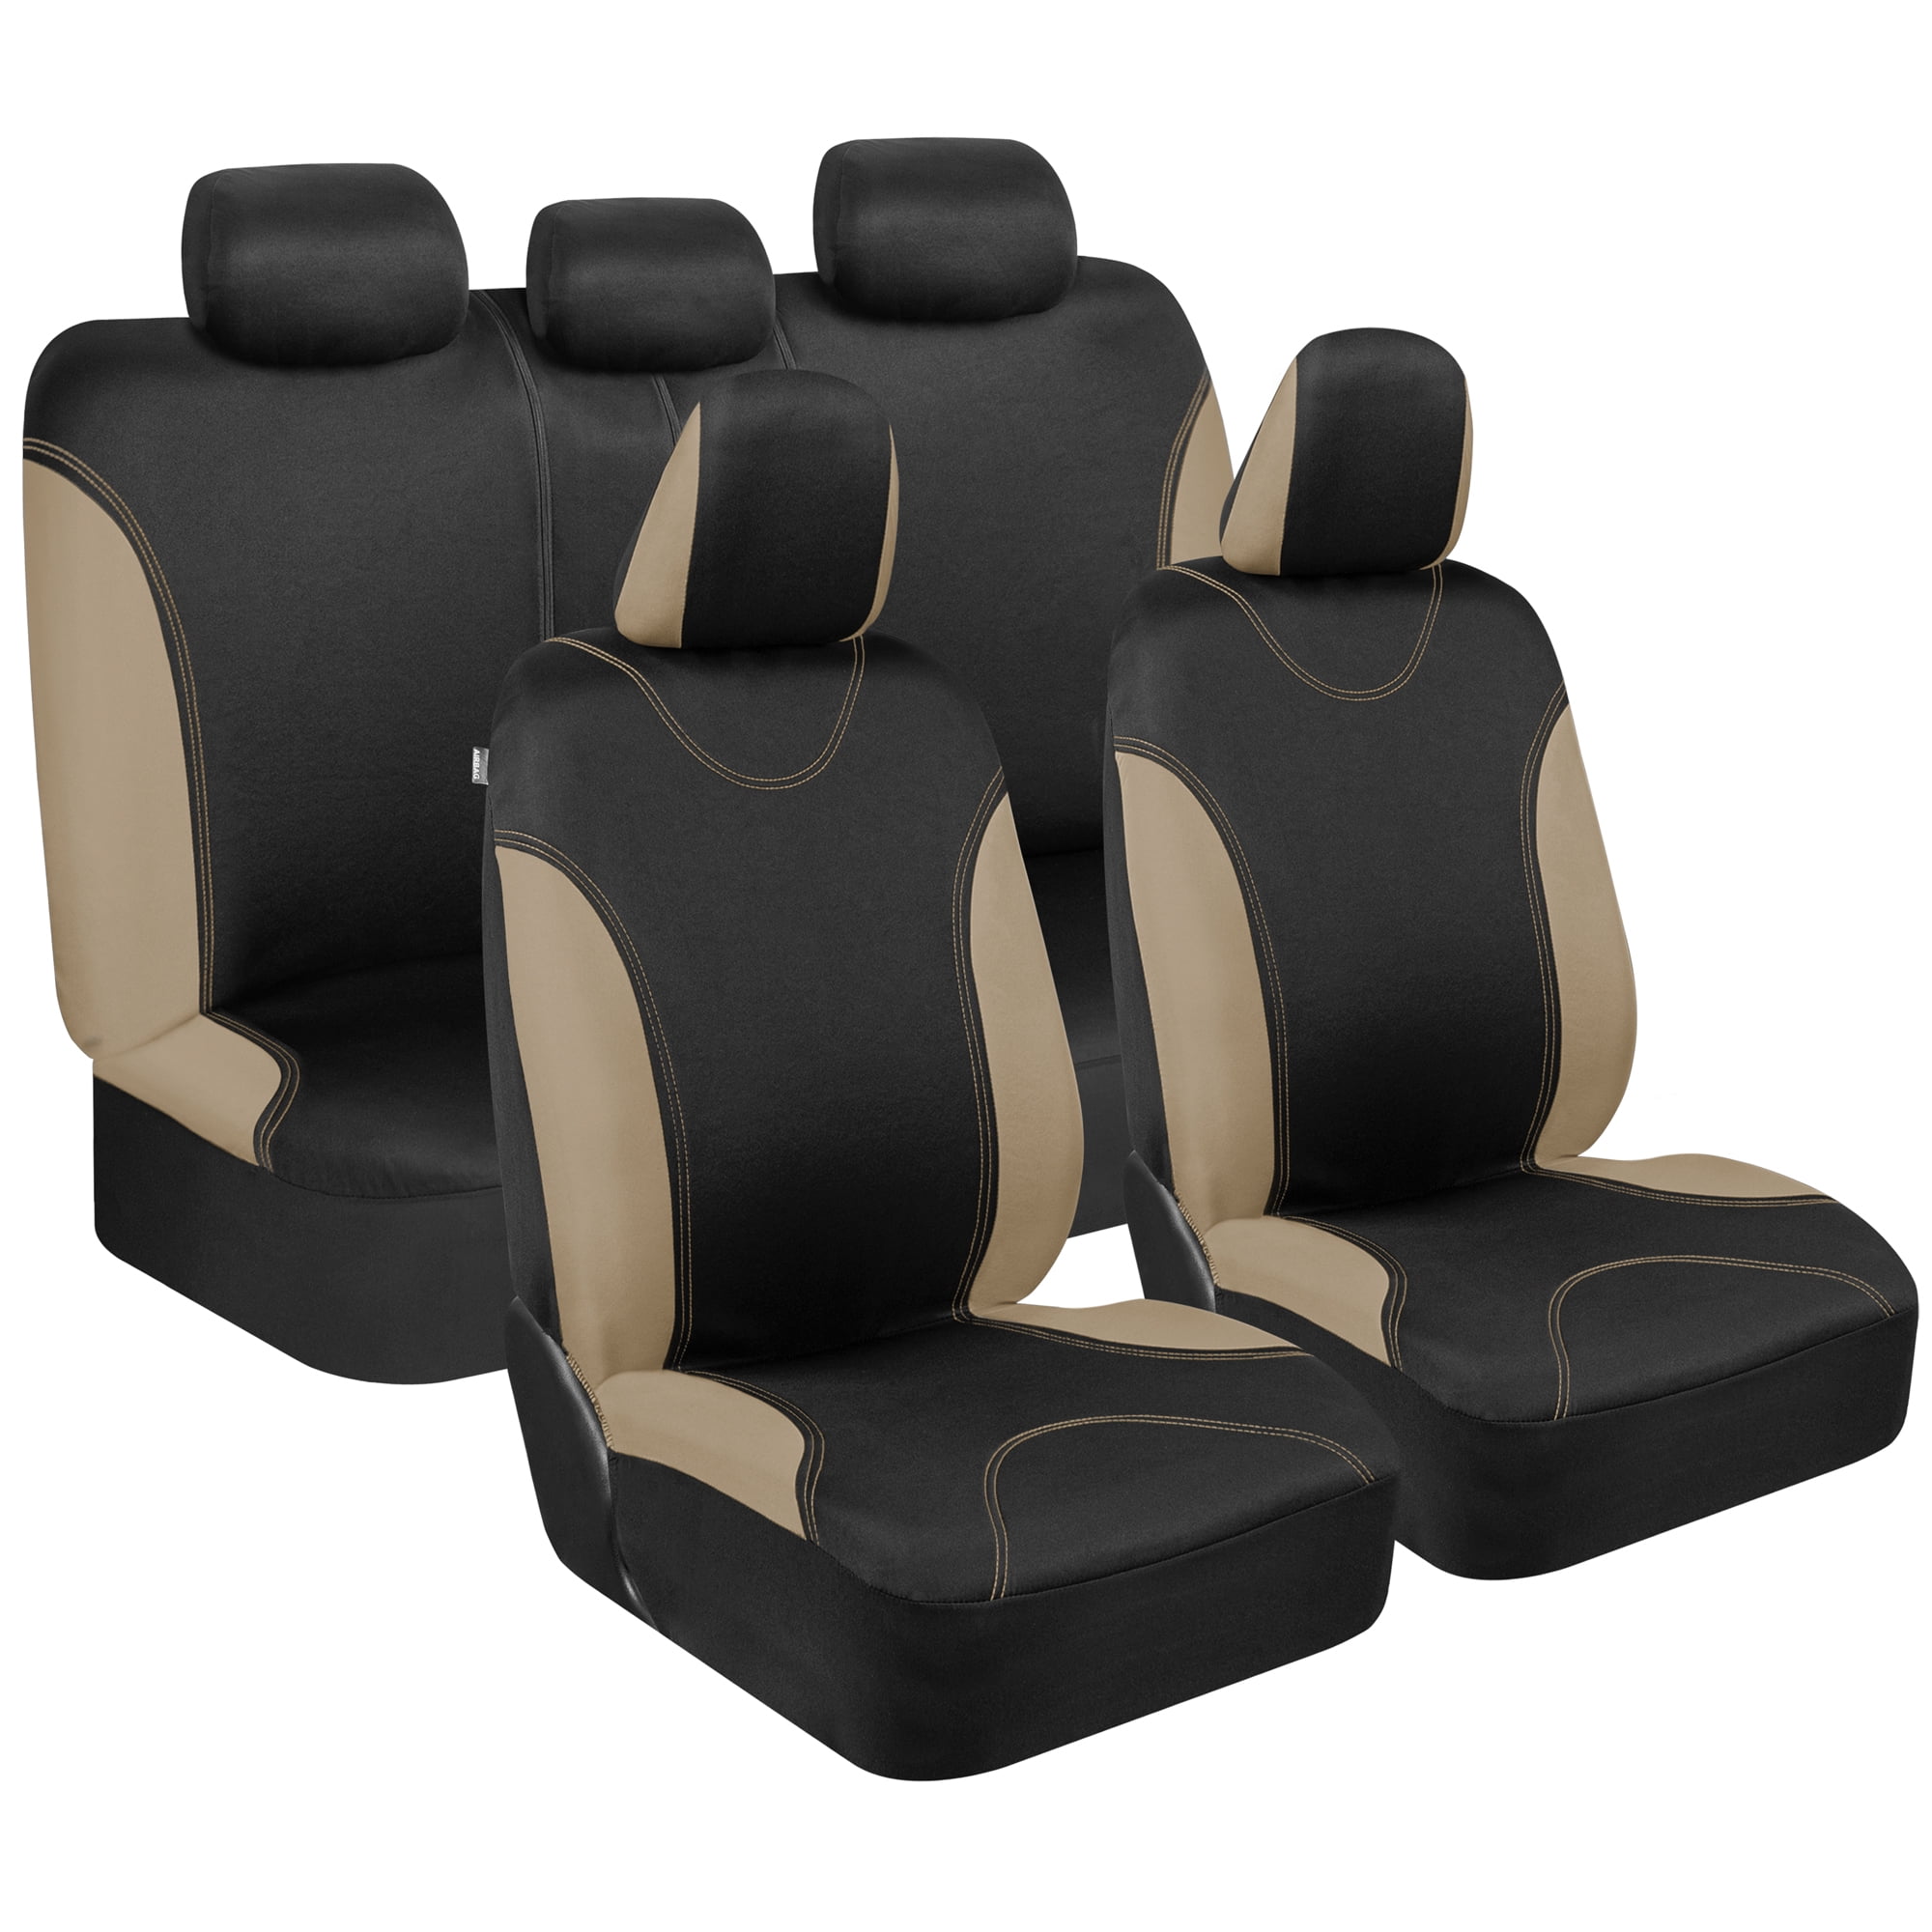 BDK UltraSleek Black Seat Covers for Cars Full Set, Two-Tone Front Seat  Covers with Matching Back Seat Cover, Stylish Car Seat Covers with Split  Bench Design, Automotive Interior Covers 